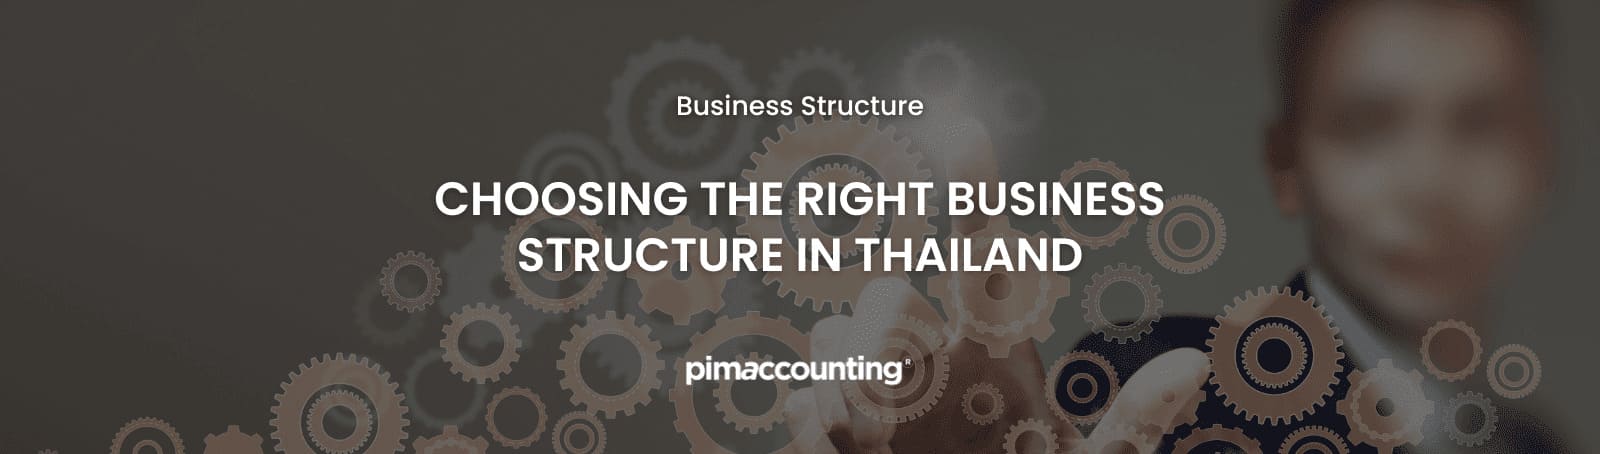 Choosing the Right Business Structure in Thailand